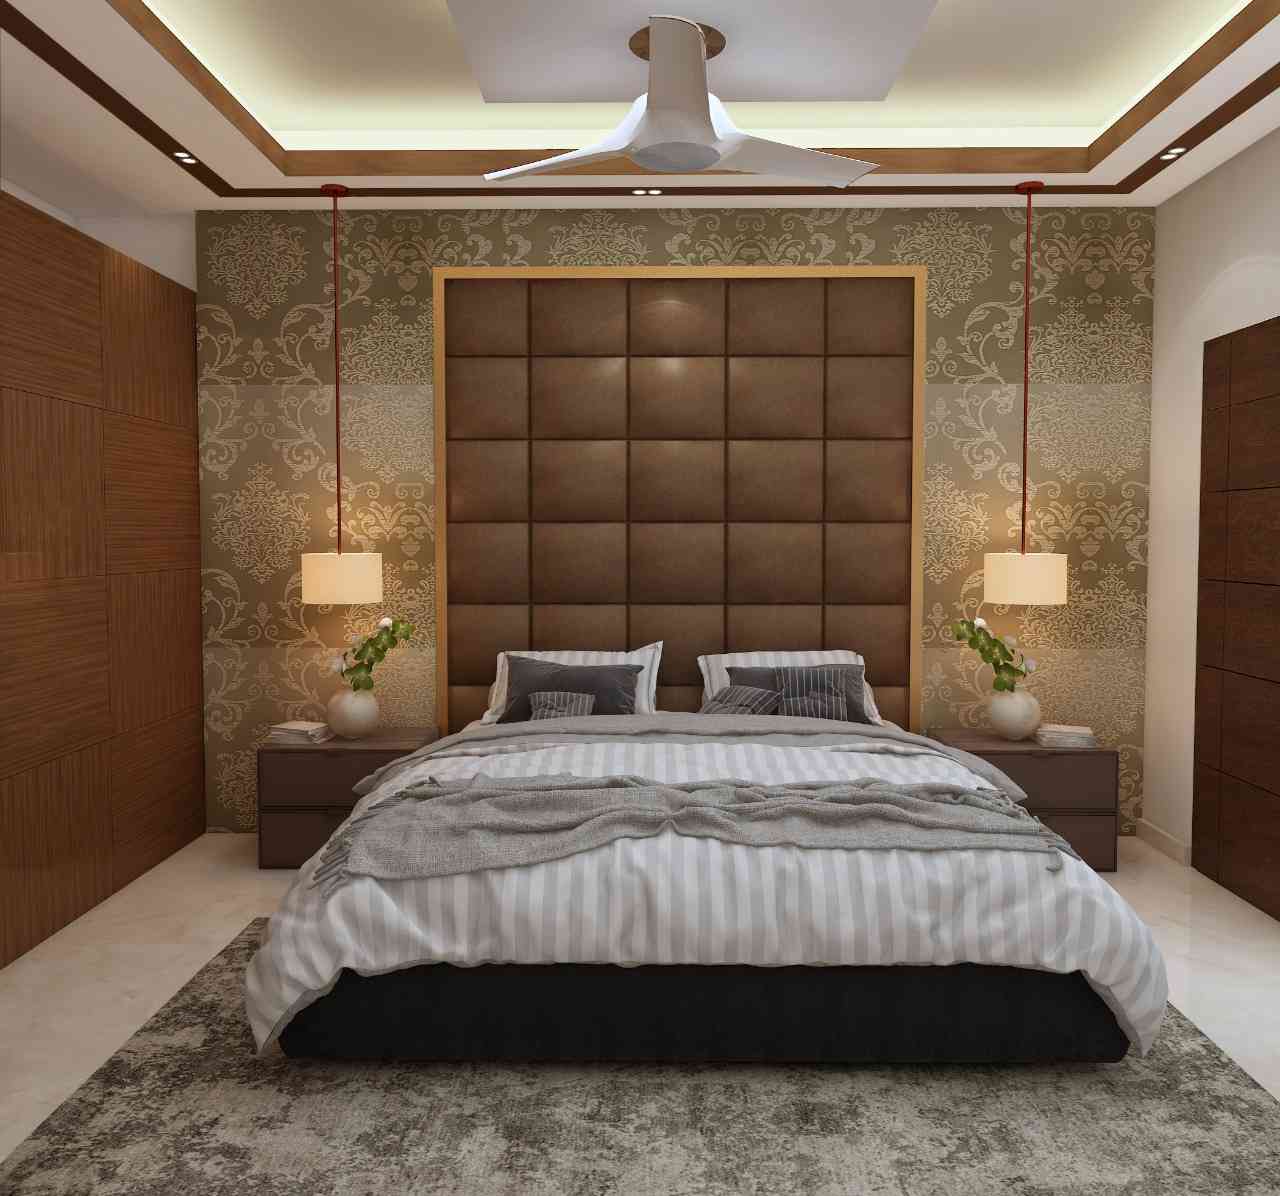 Farmhouse Bedroom Design With A Leather Upholstered Double Bed